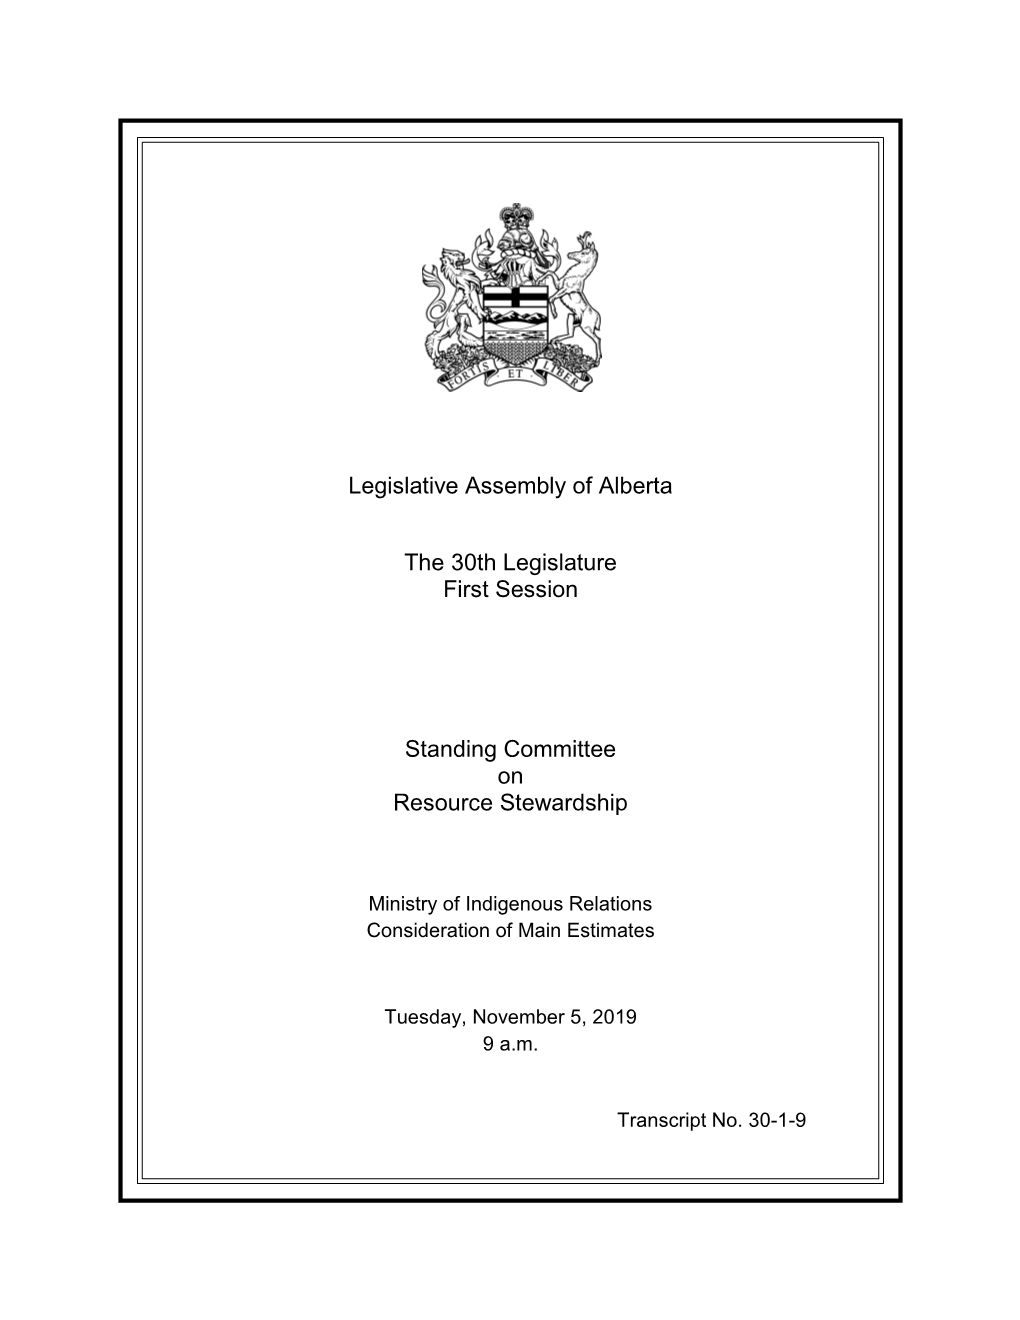 Legislative Assembly of Alberta the 30Th Legislature First Session Standing Committee on Resource Stewardship